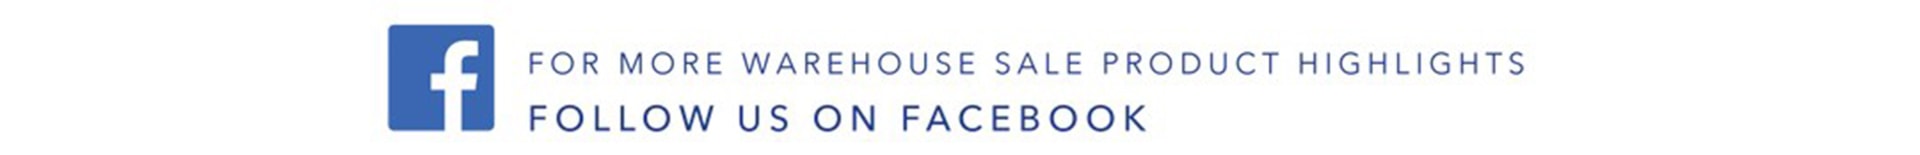 Follow us on Facebook for more warehouse sale product highlights